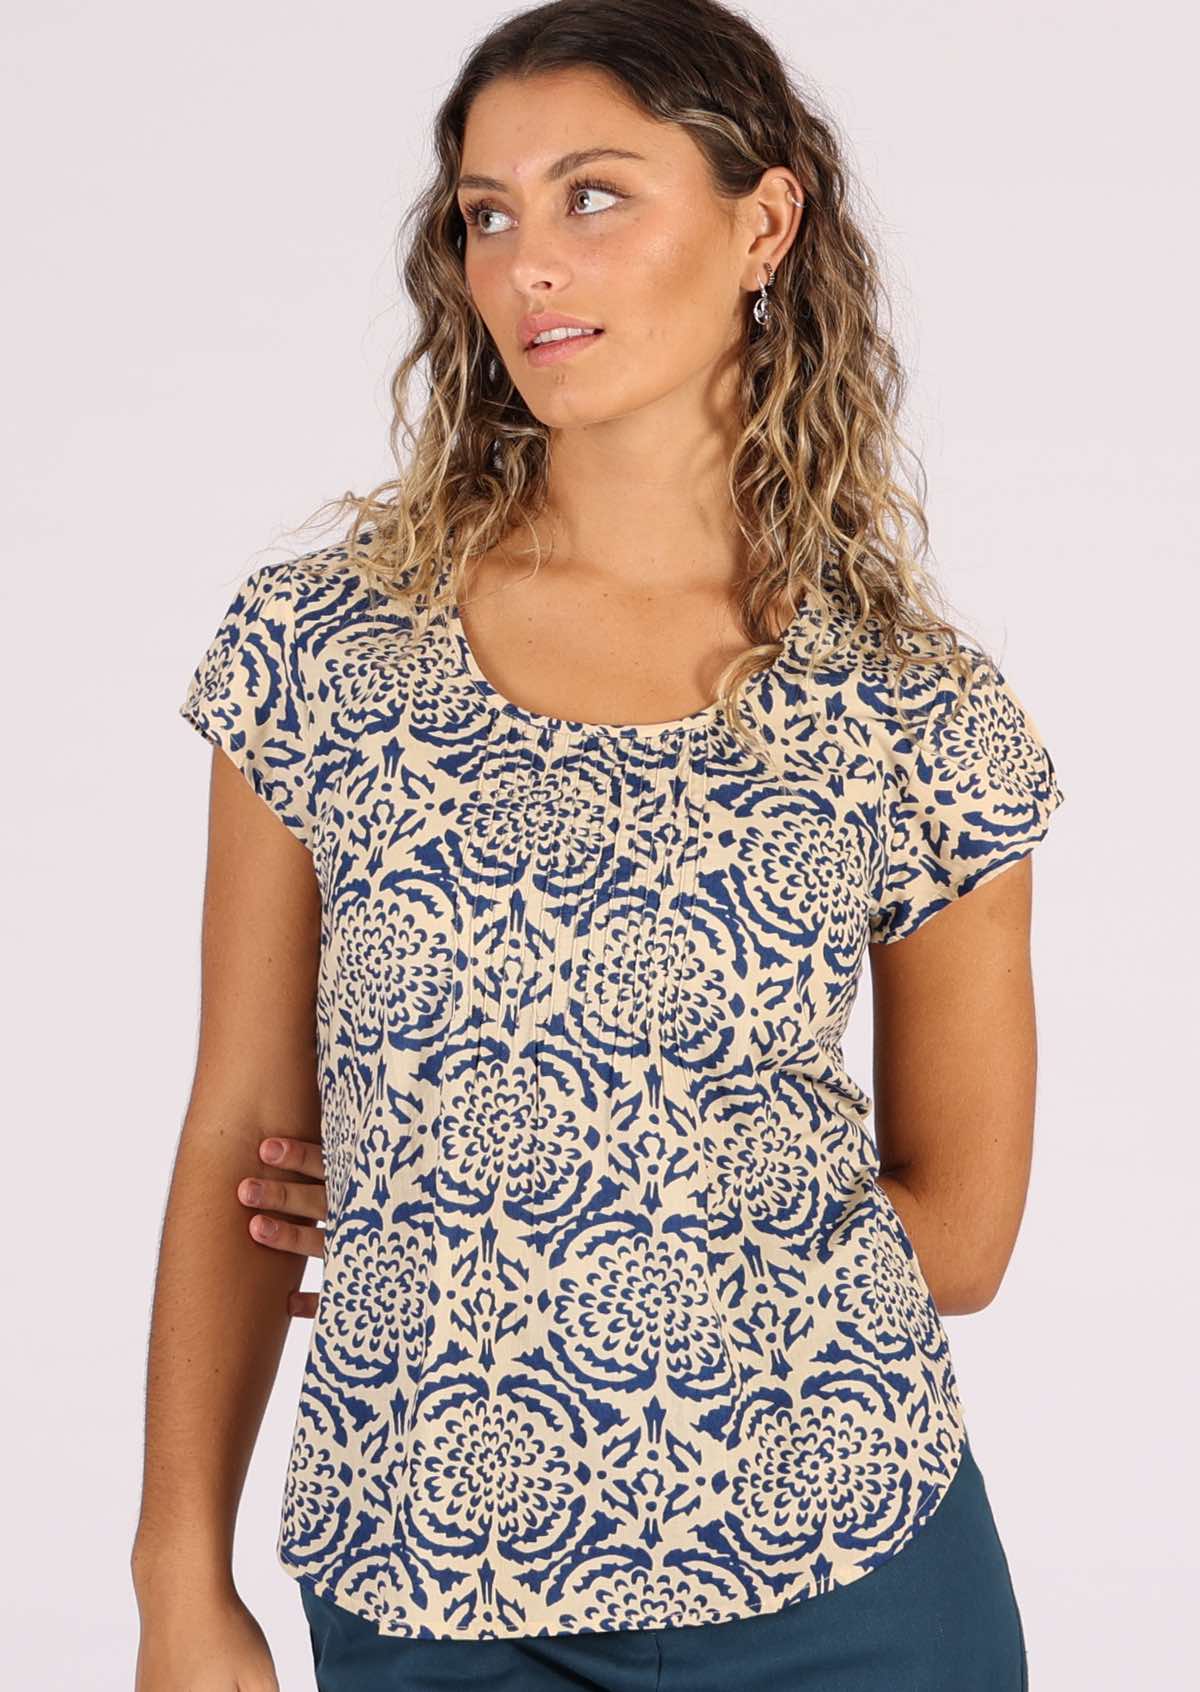 Blue Dahlia stamped look print on cream base cotton top